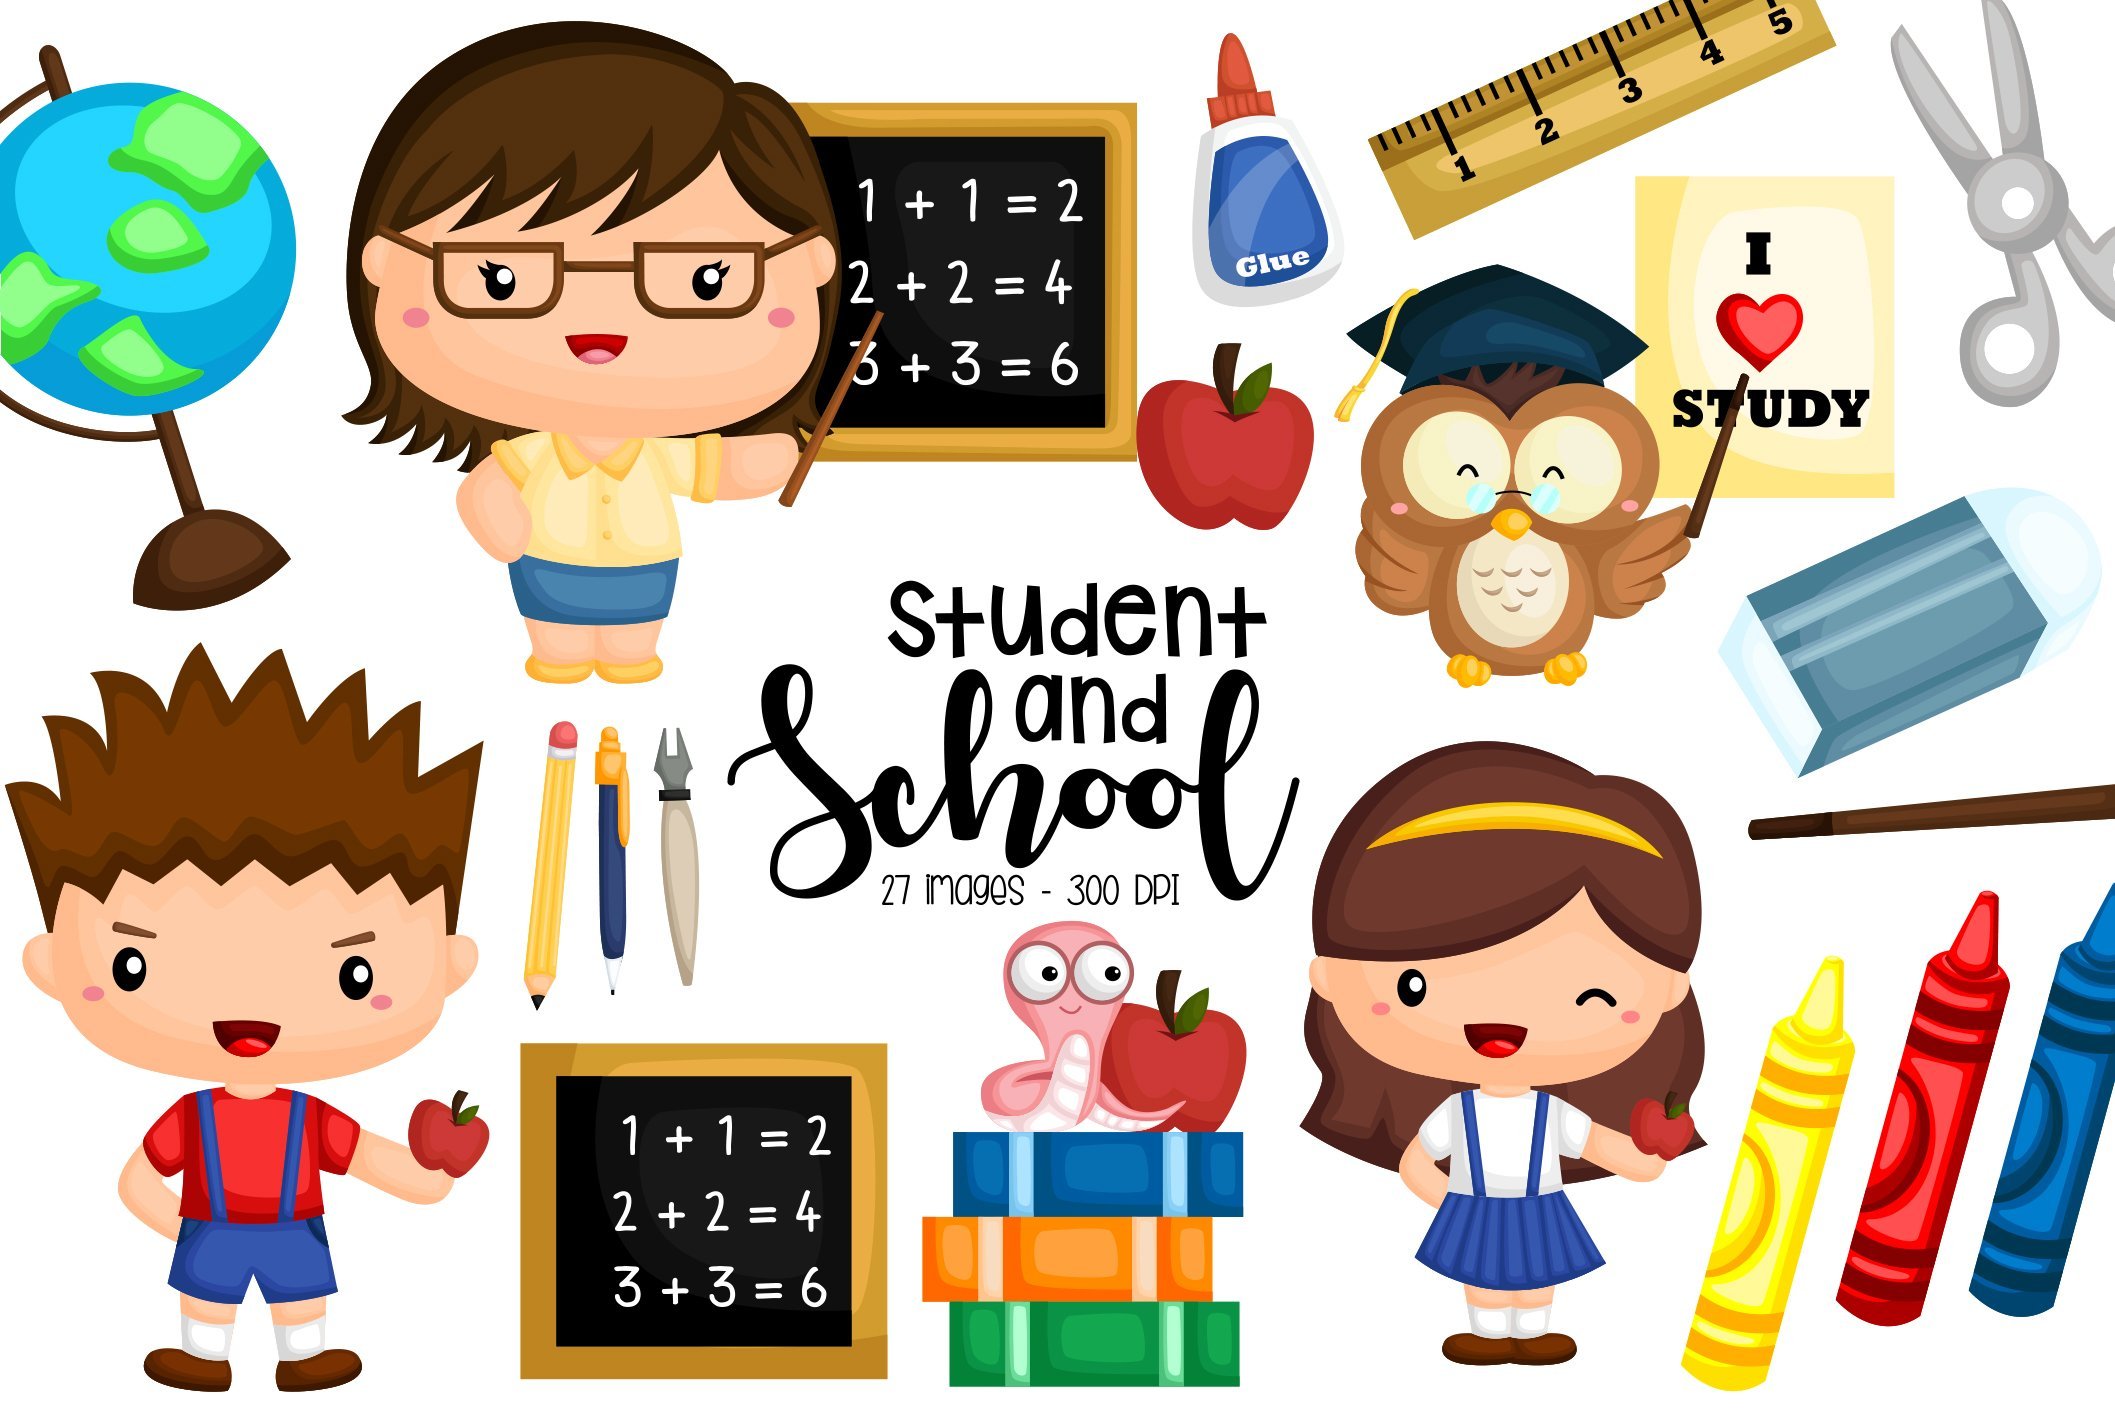 School Learning Activity Clipart cover image.